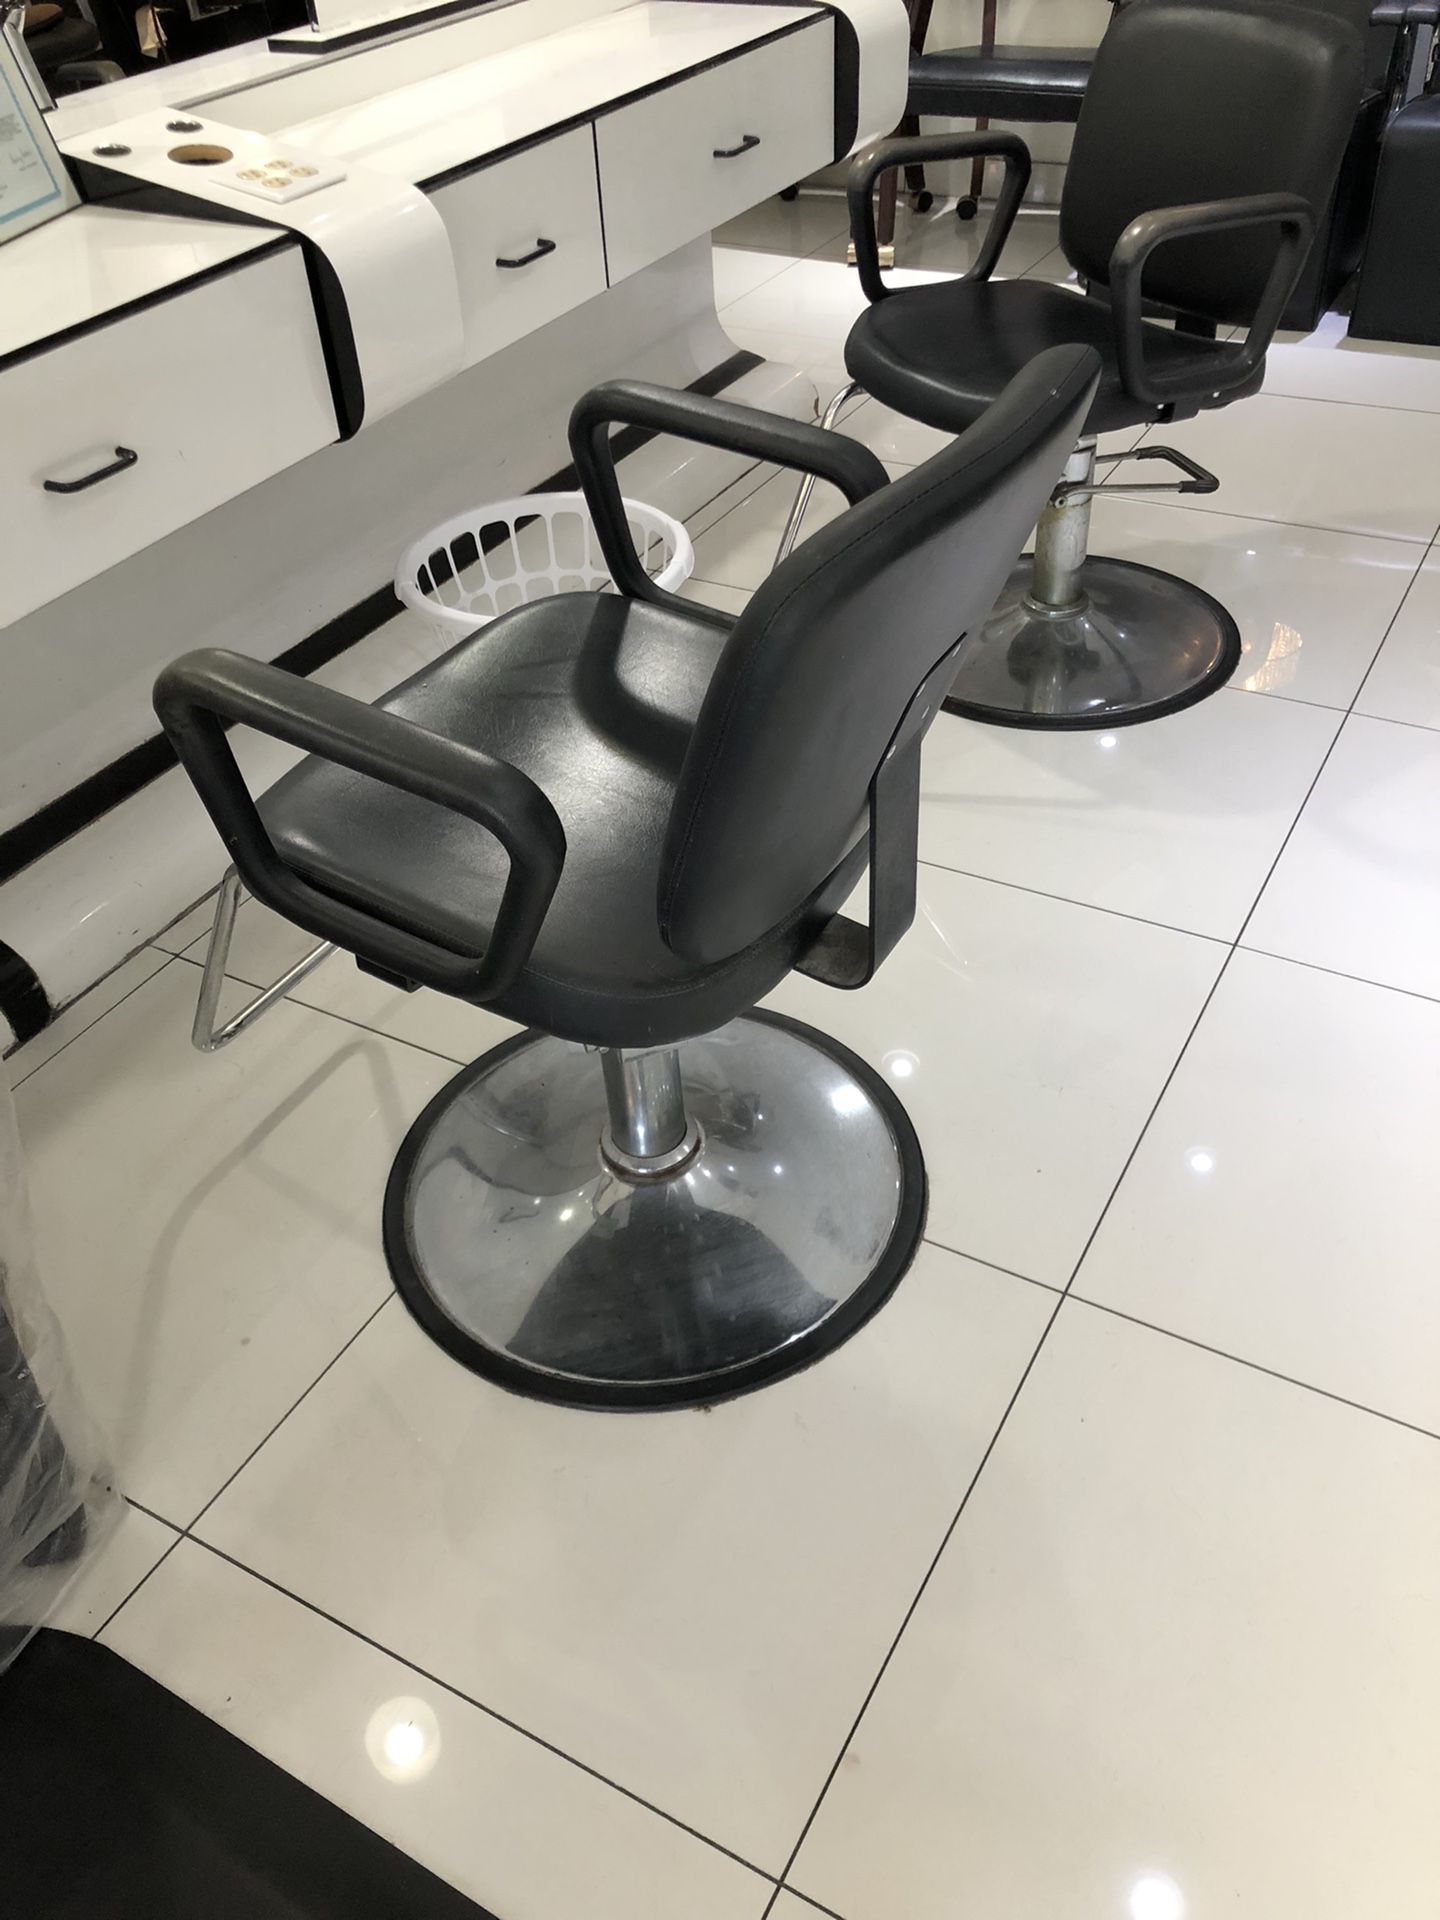 16 Hydraulic Hair Cutting Chairs $40 Ea,Pick Up Only